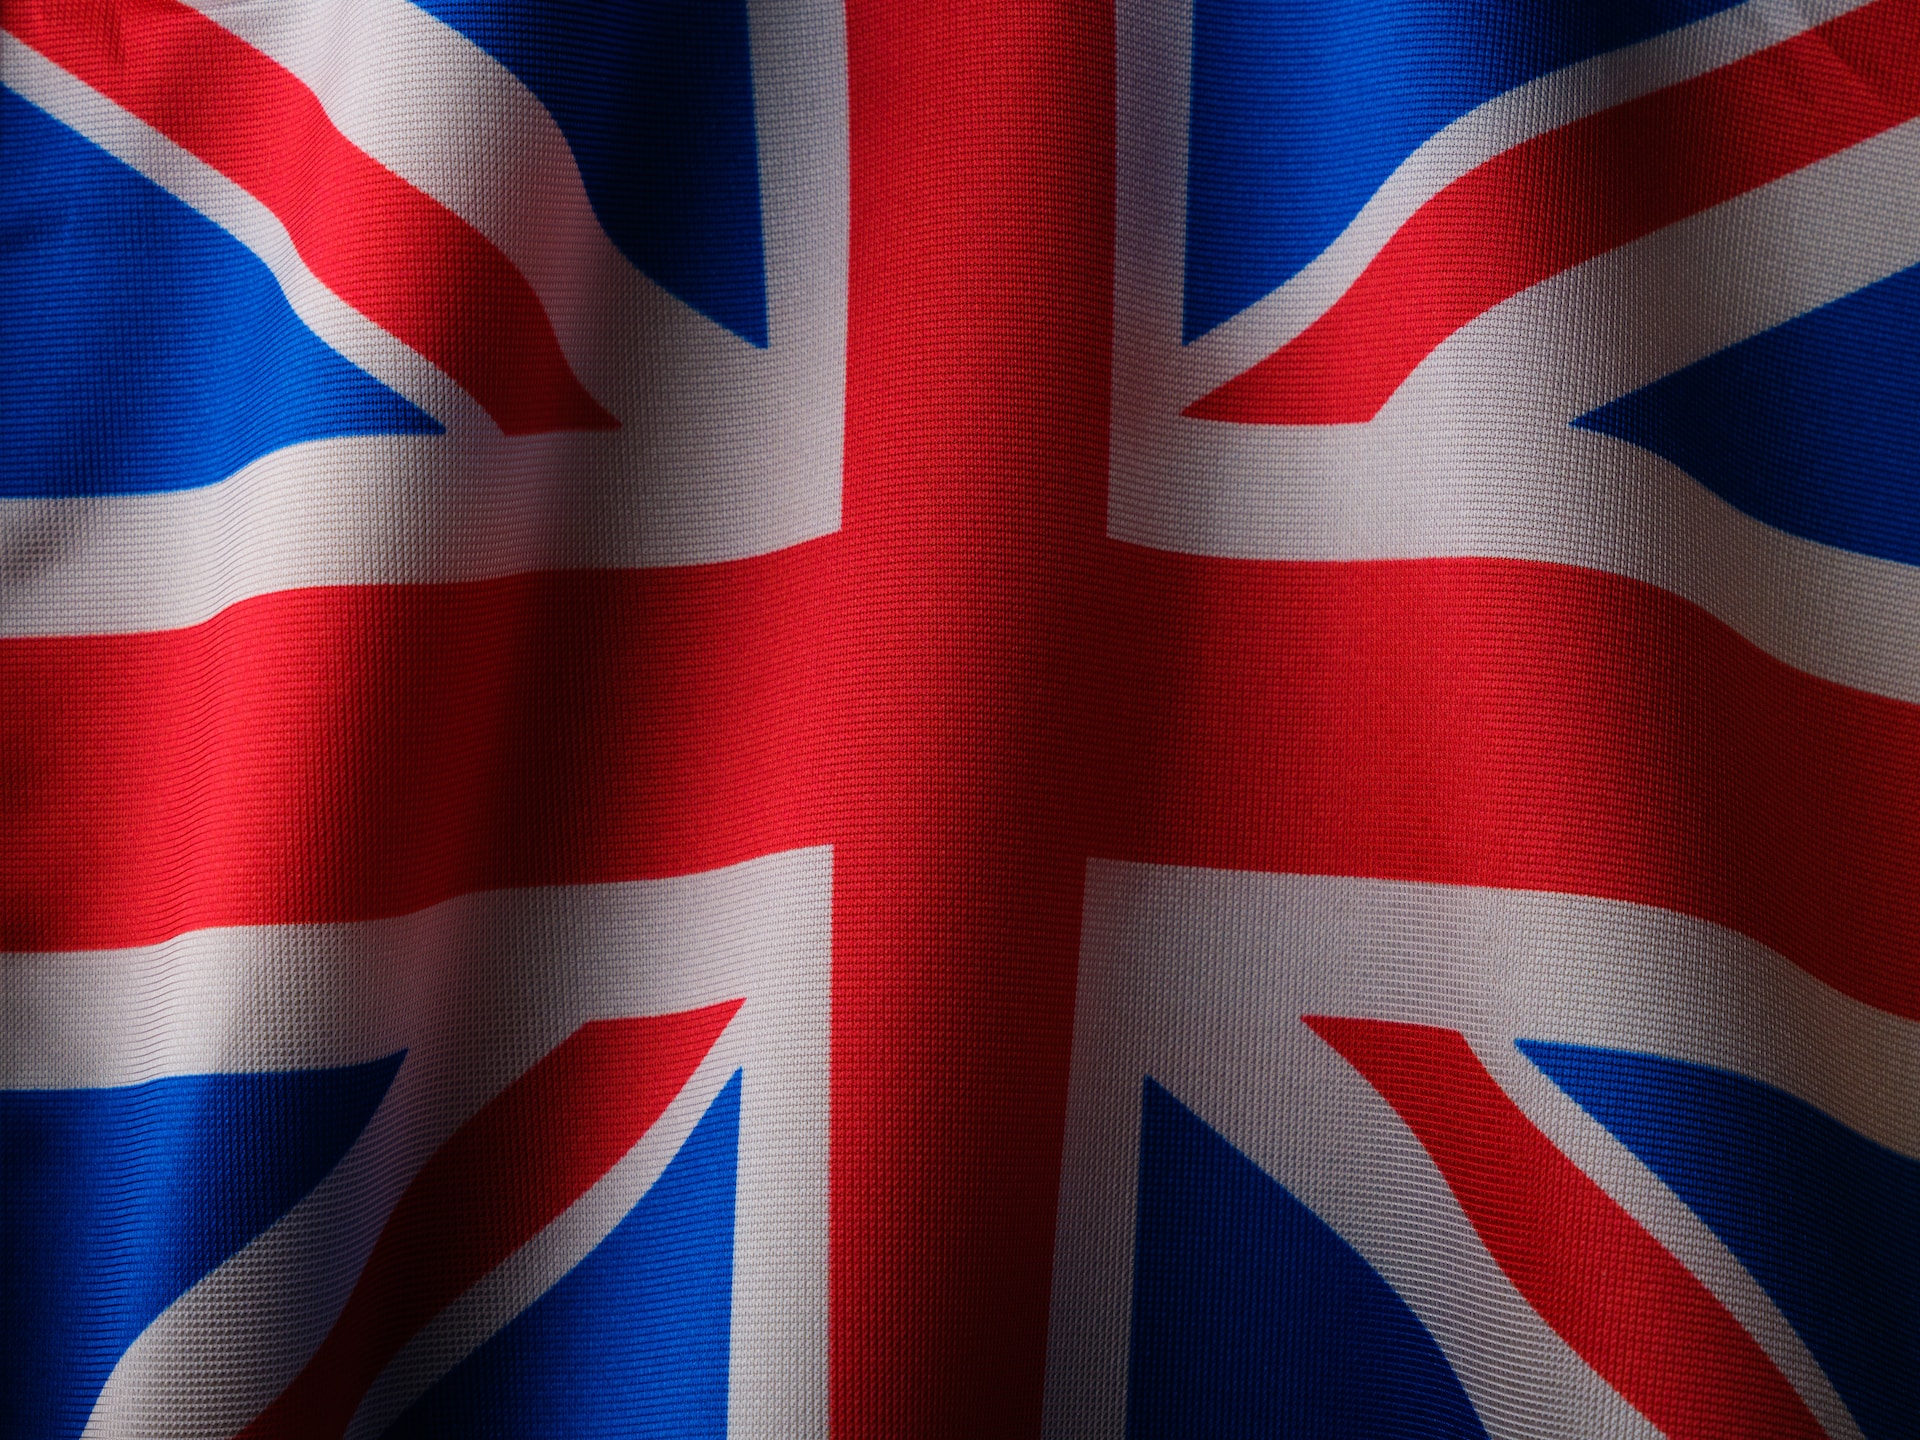 An Overview of the United Kingdom eCommerce Sector